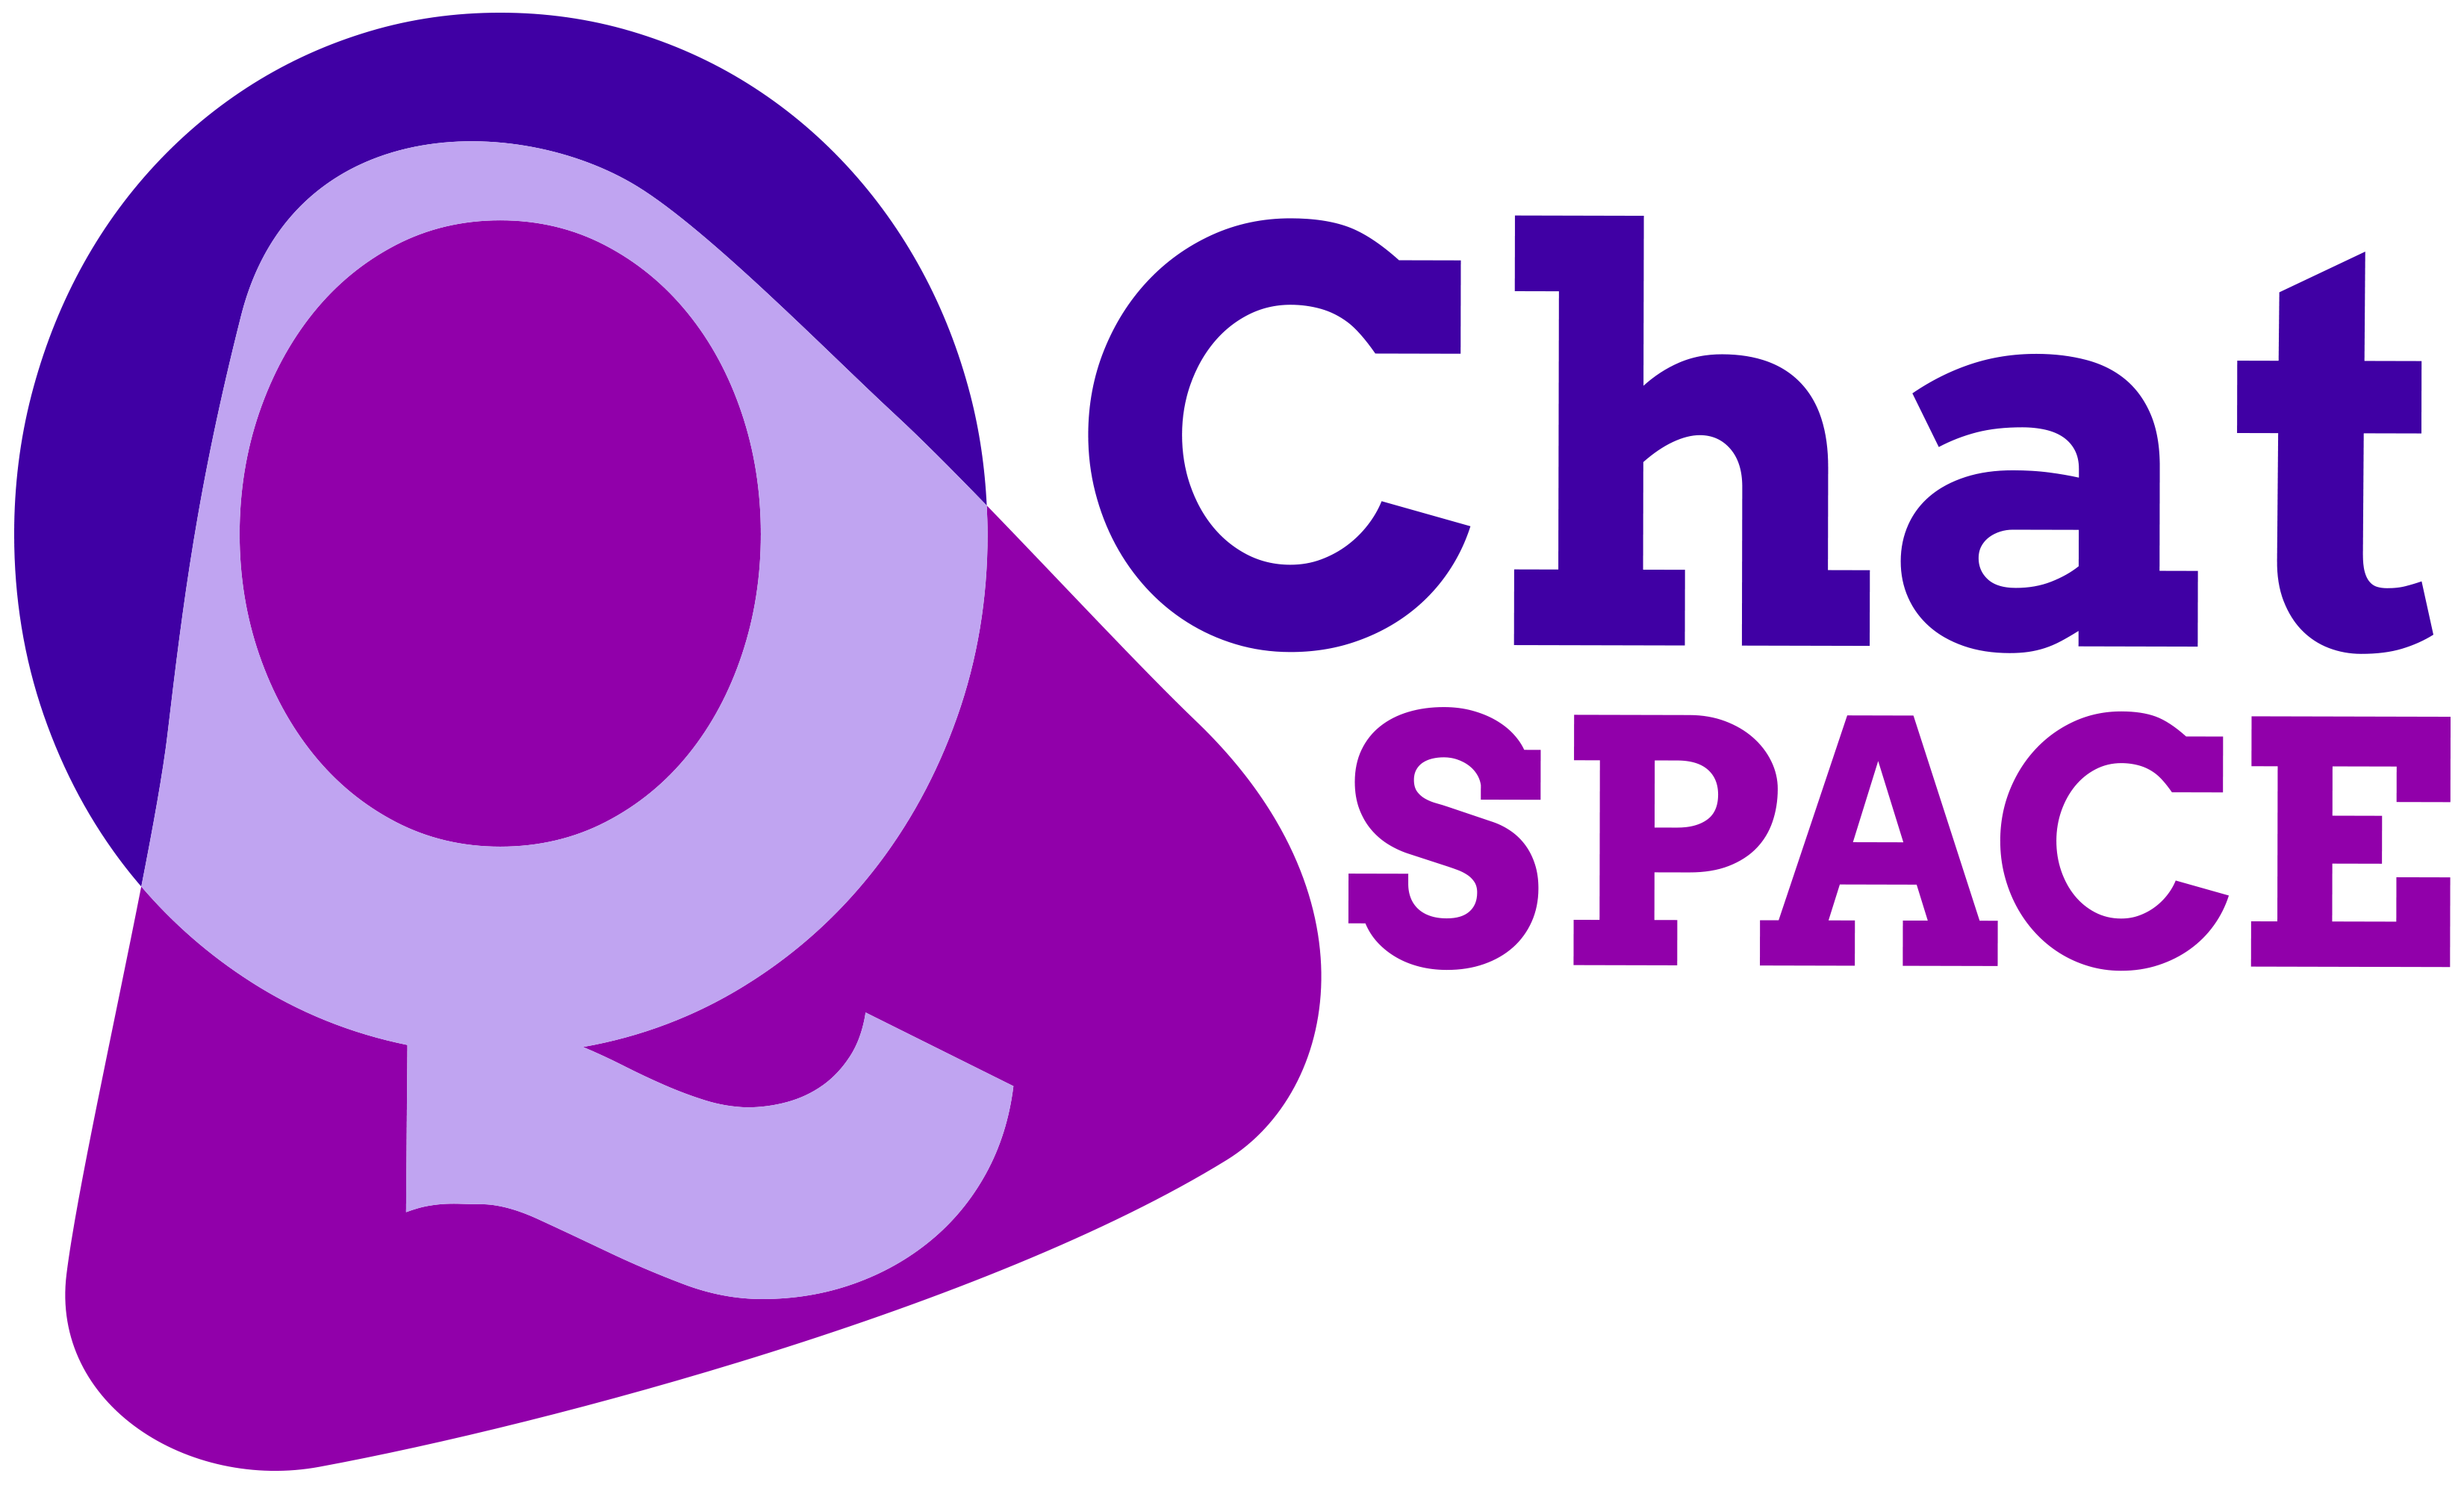 Learn more about Q Chat Space